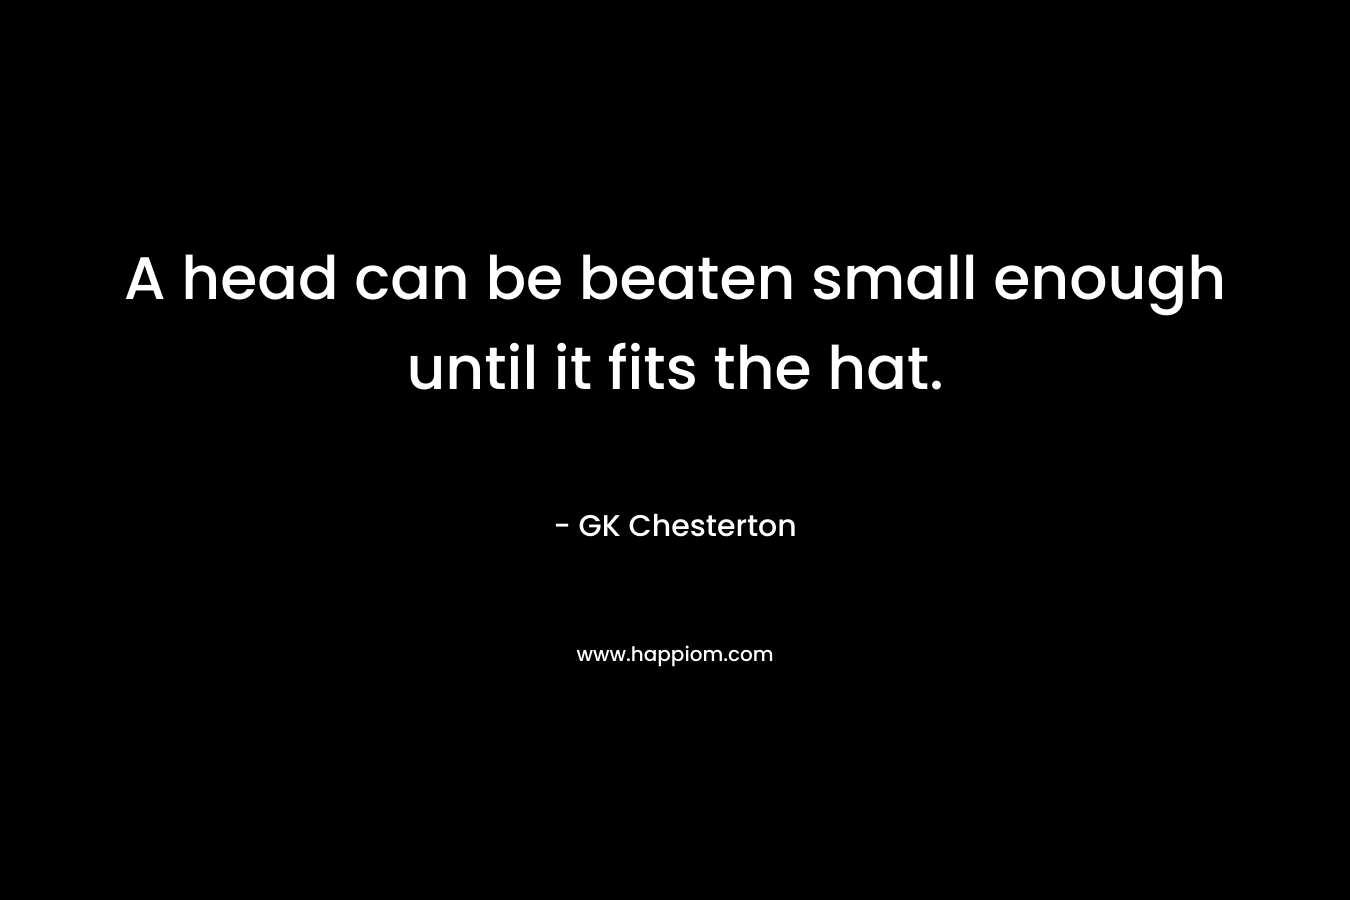 A head can be beaten small enough until it fits the hat.